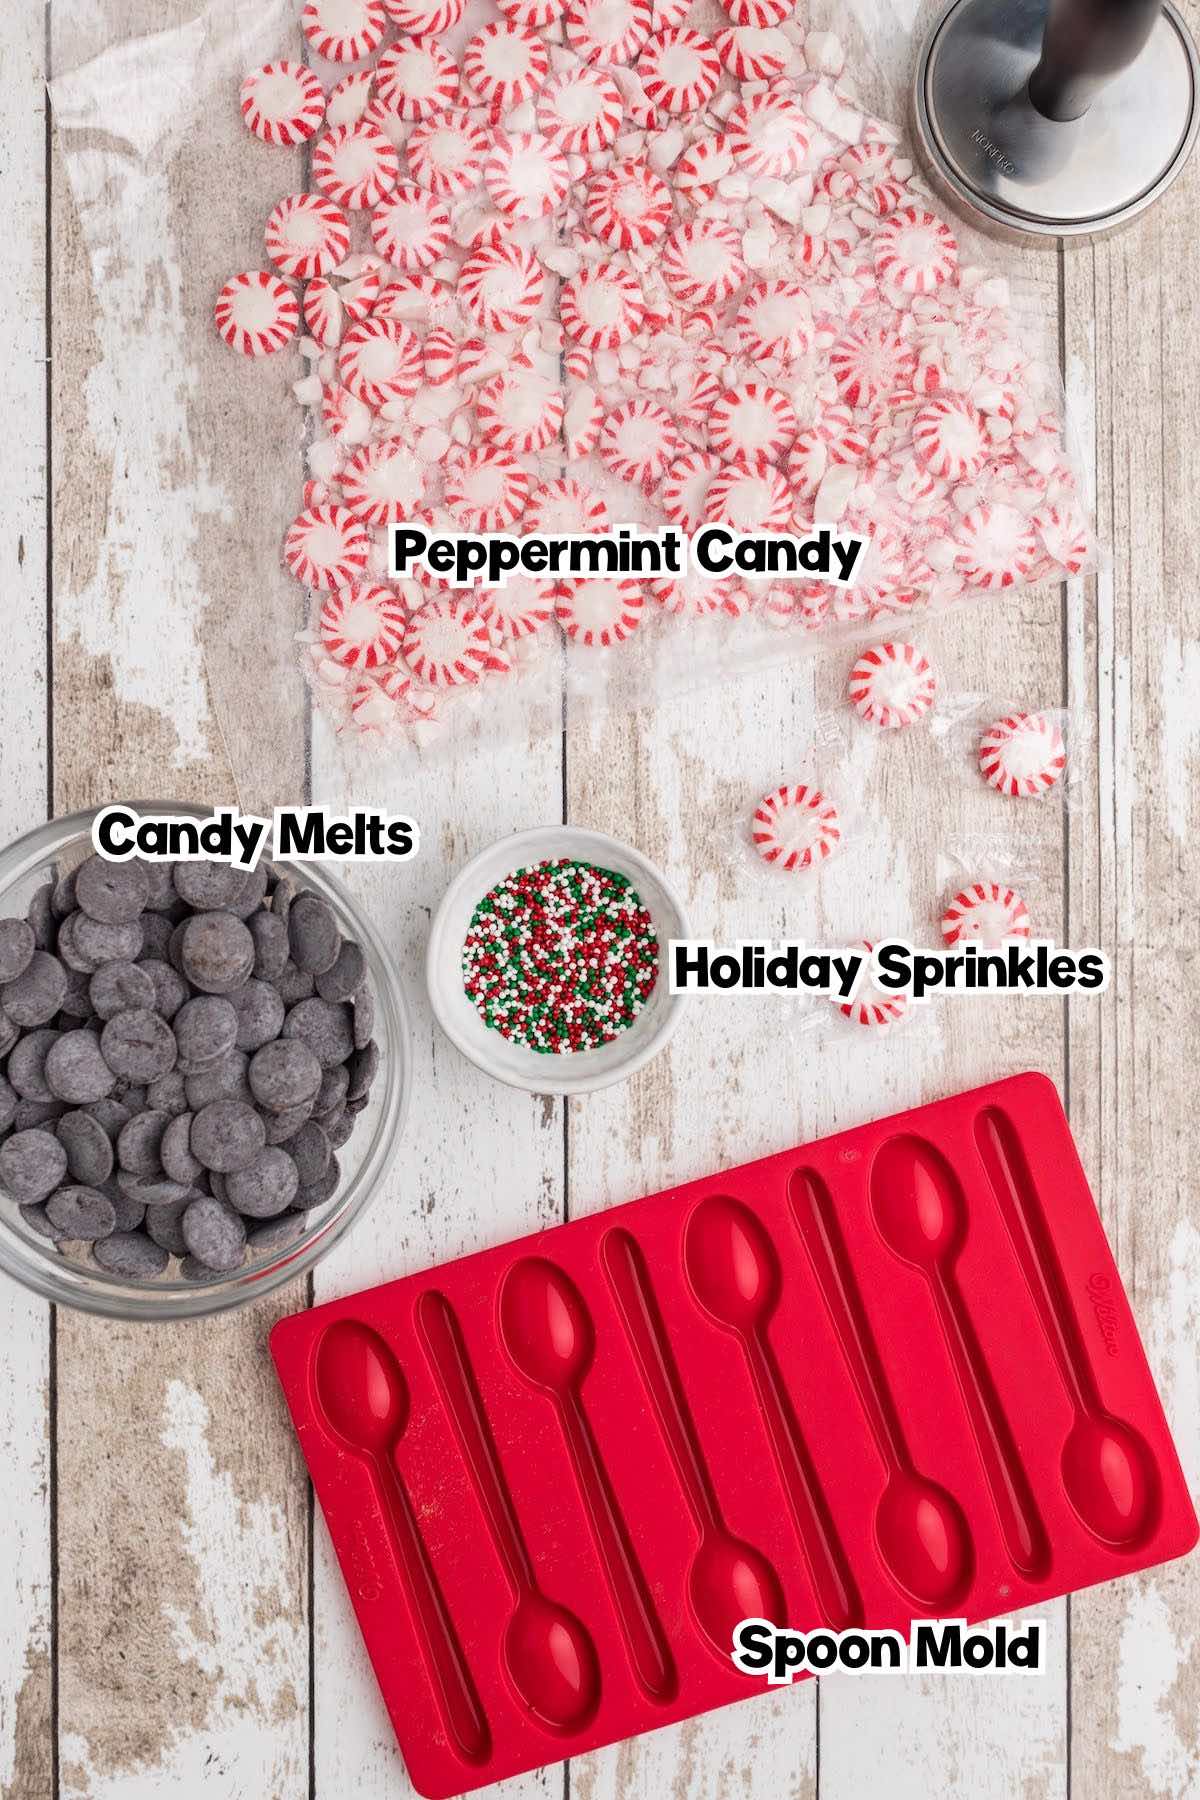 peppermint candy spoon ingredients.